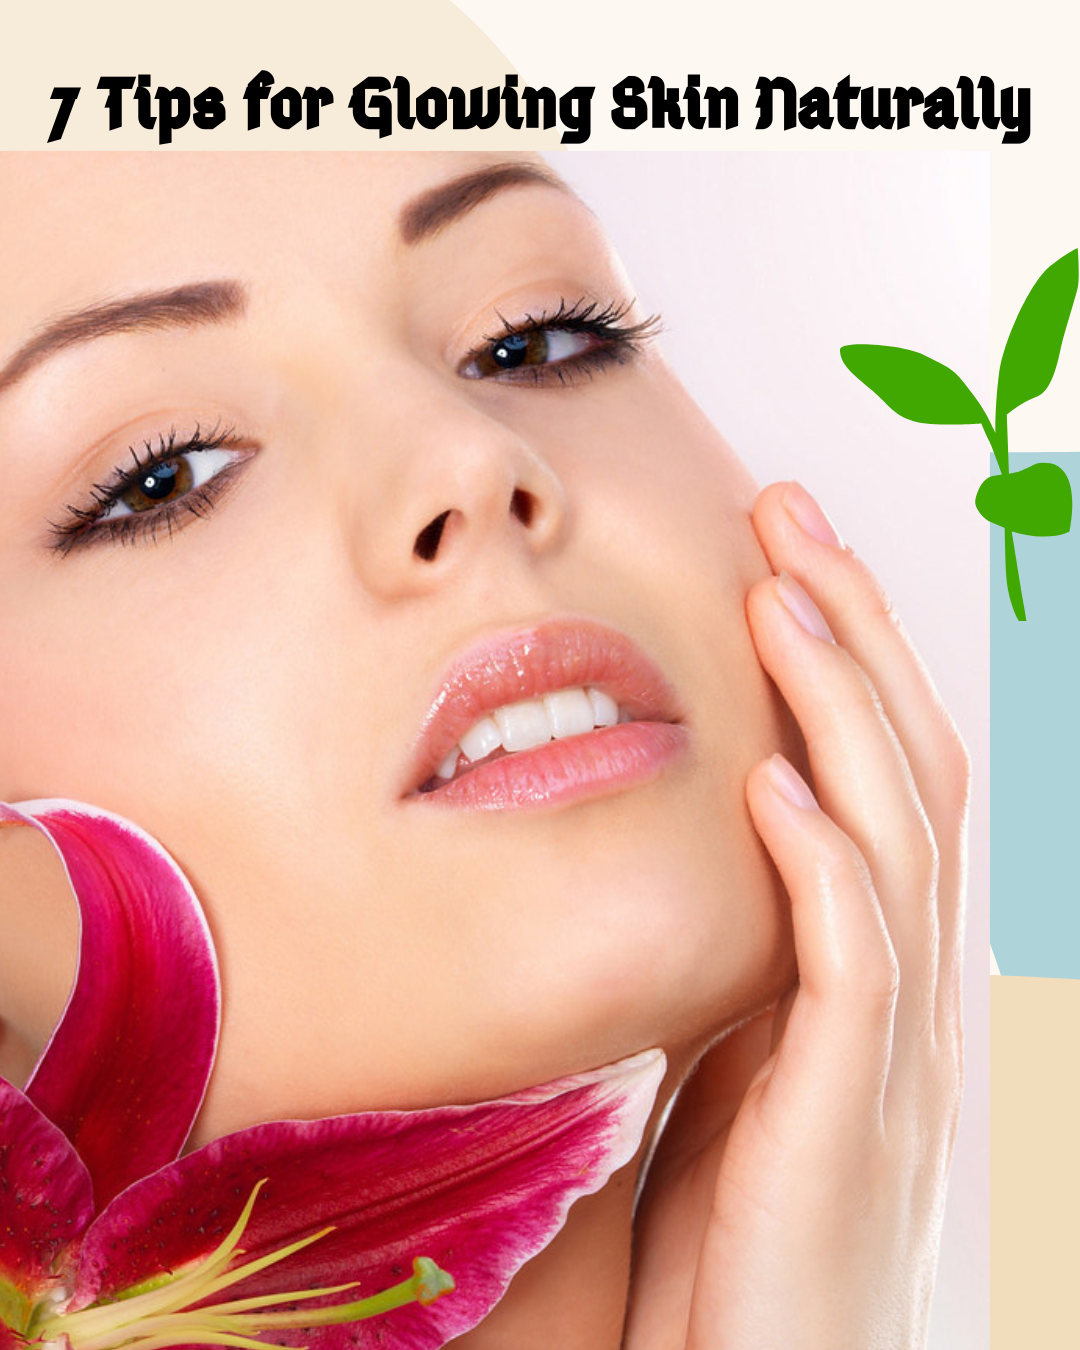 7 Tips for Glowing Skin Naturally